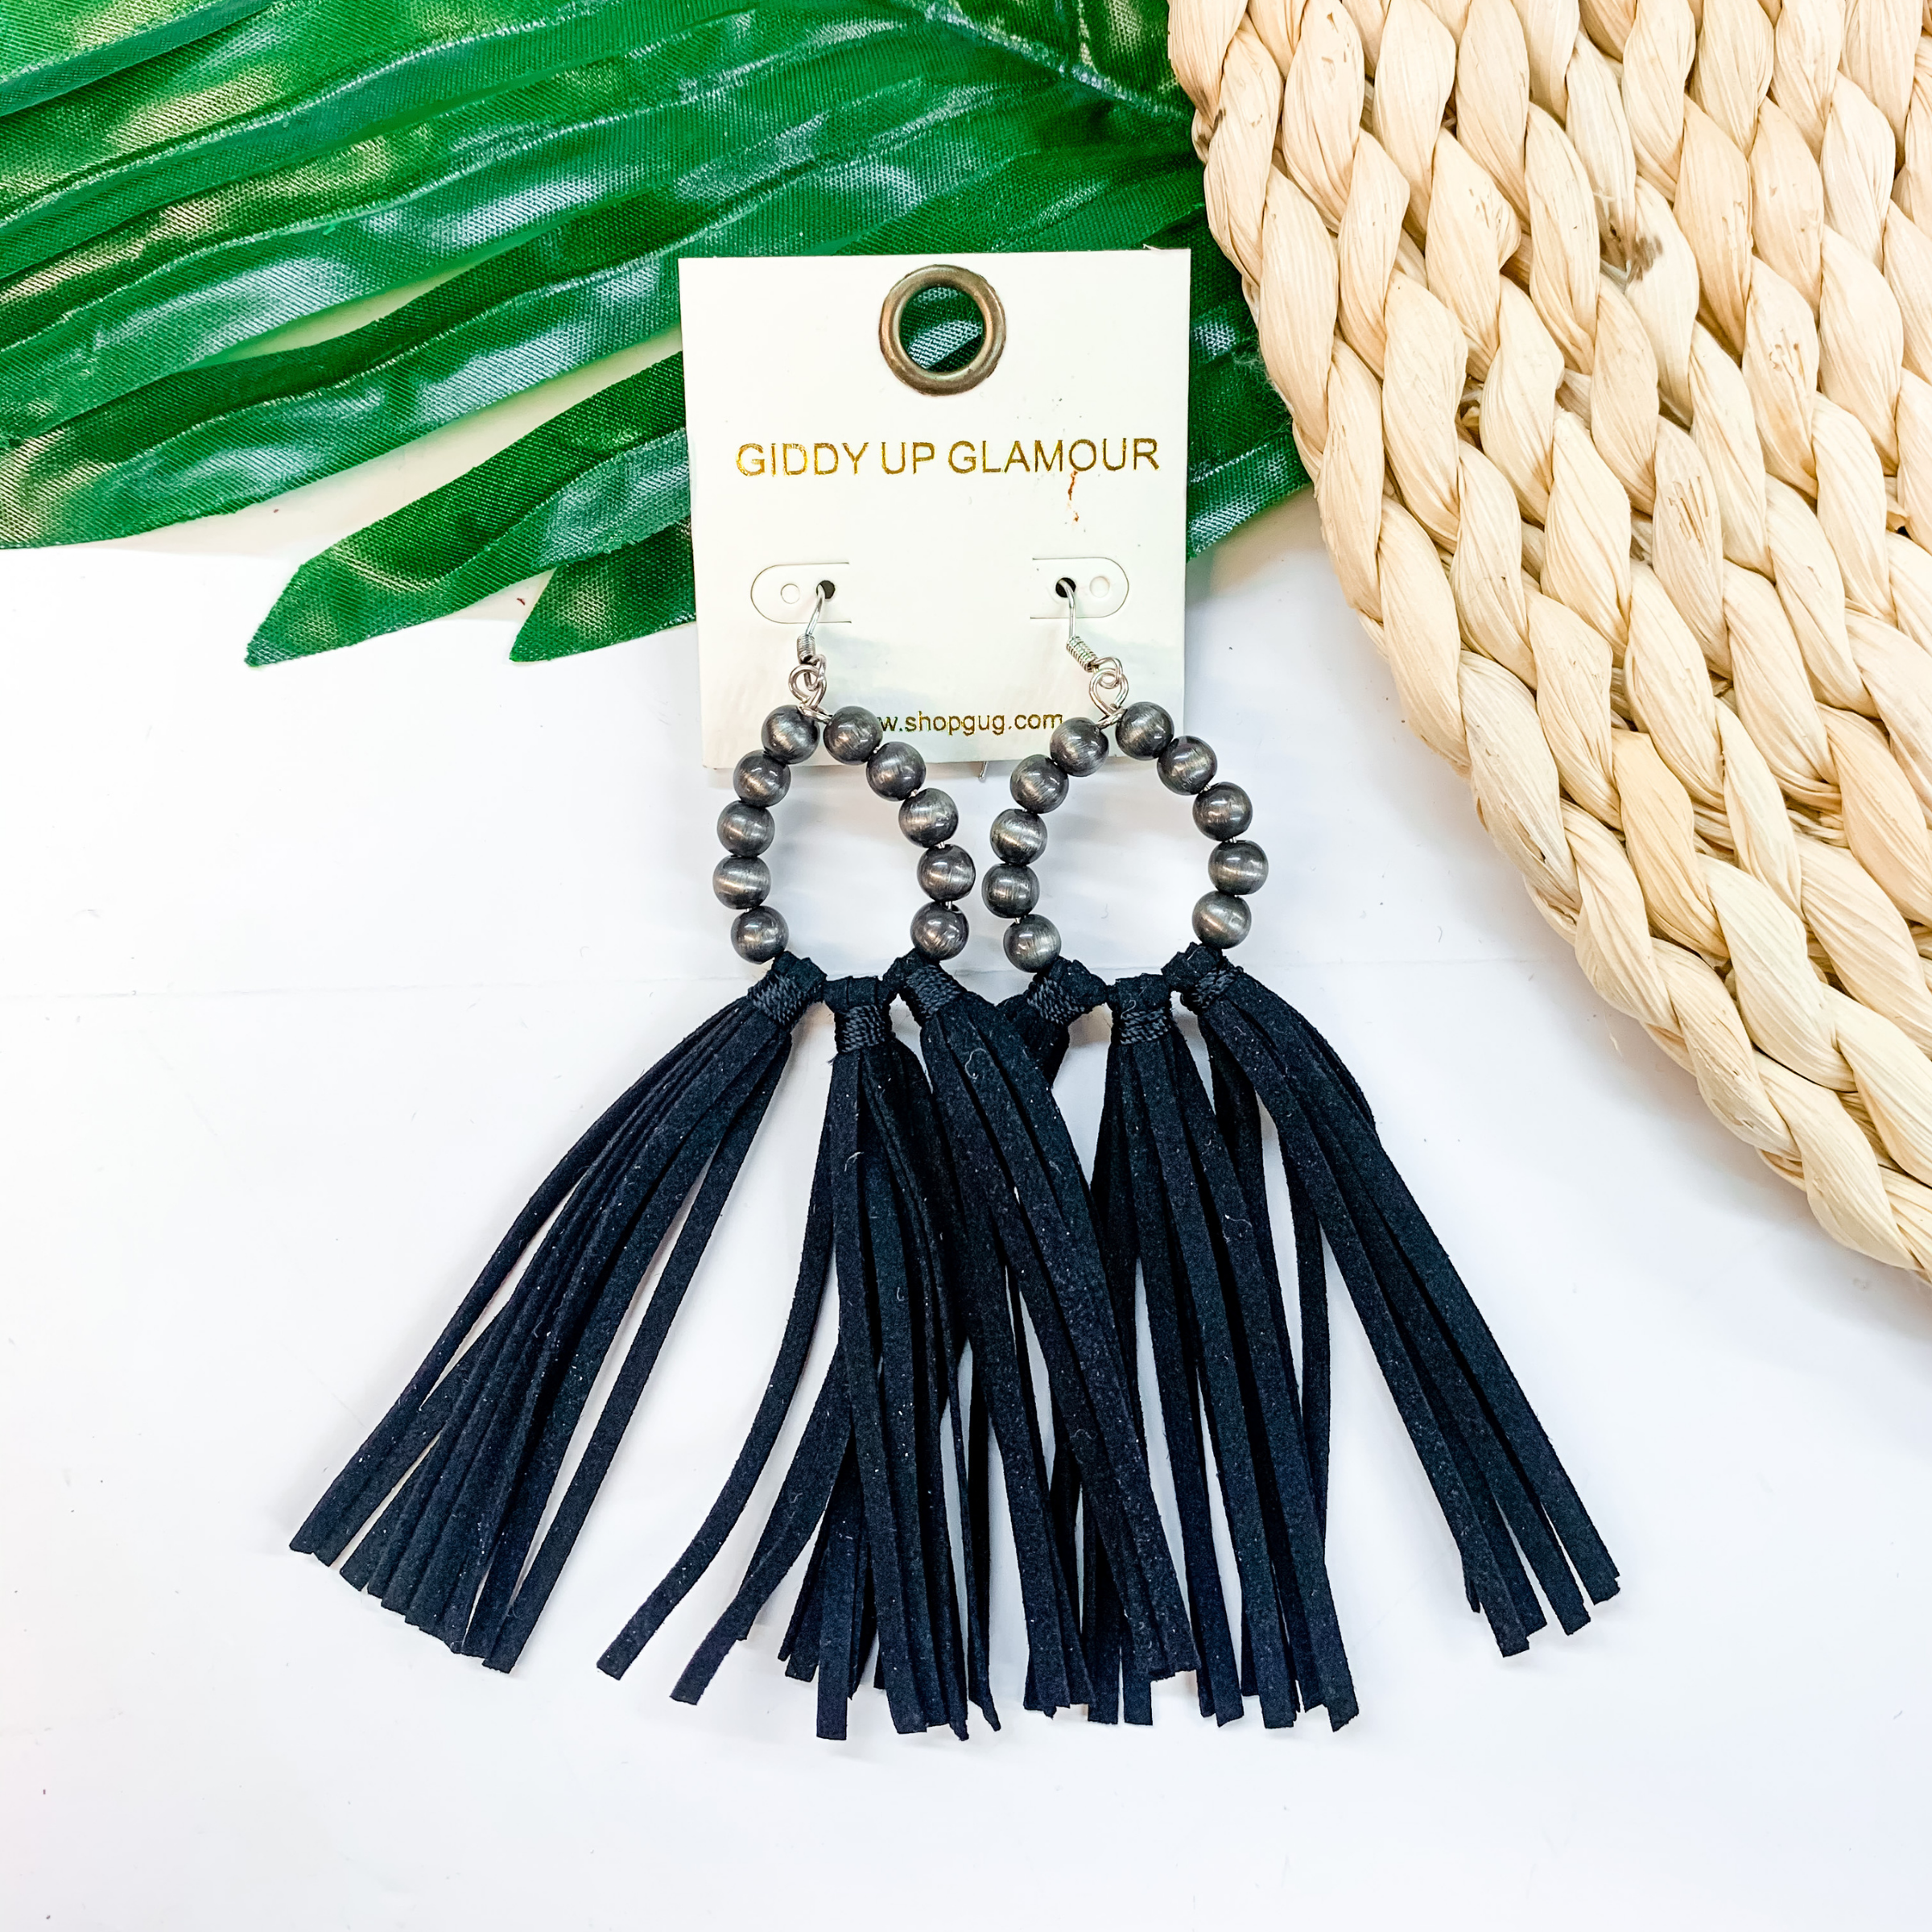 A pair of faux Navajo pearl earrings with black tassels. These earrings are pictured on a white background with a basket and a green palm leaf.